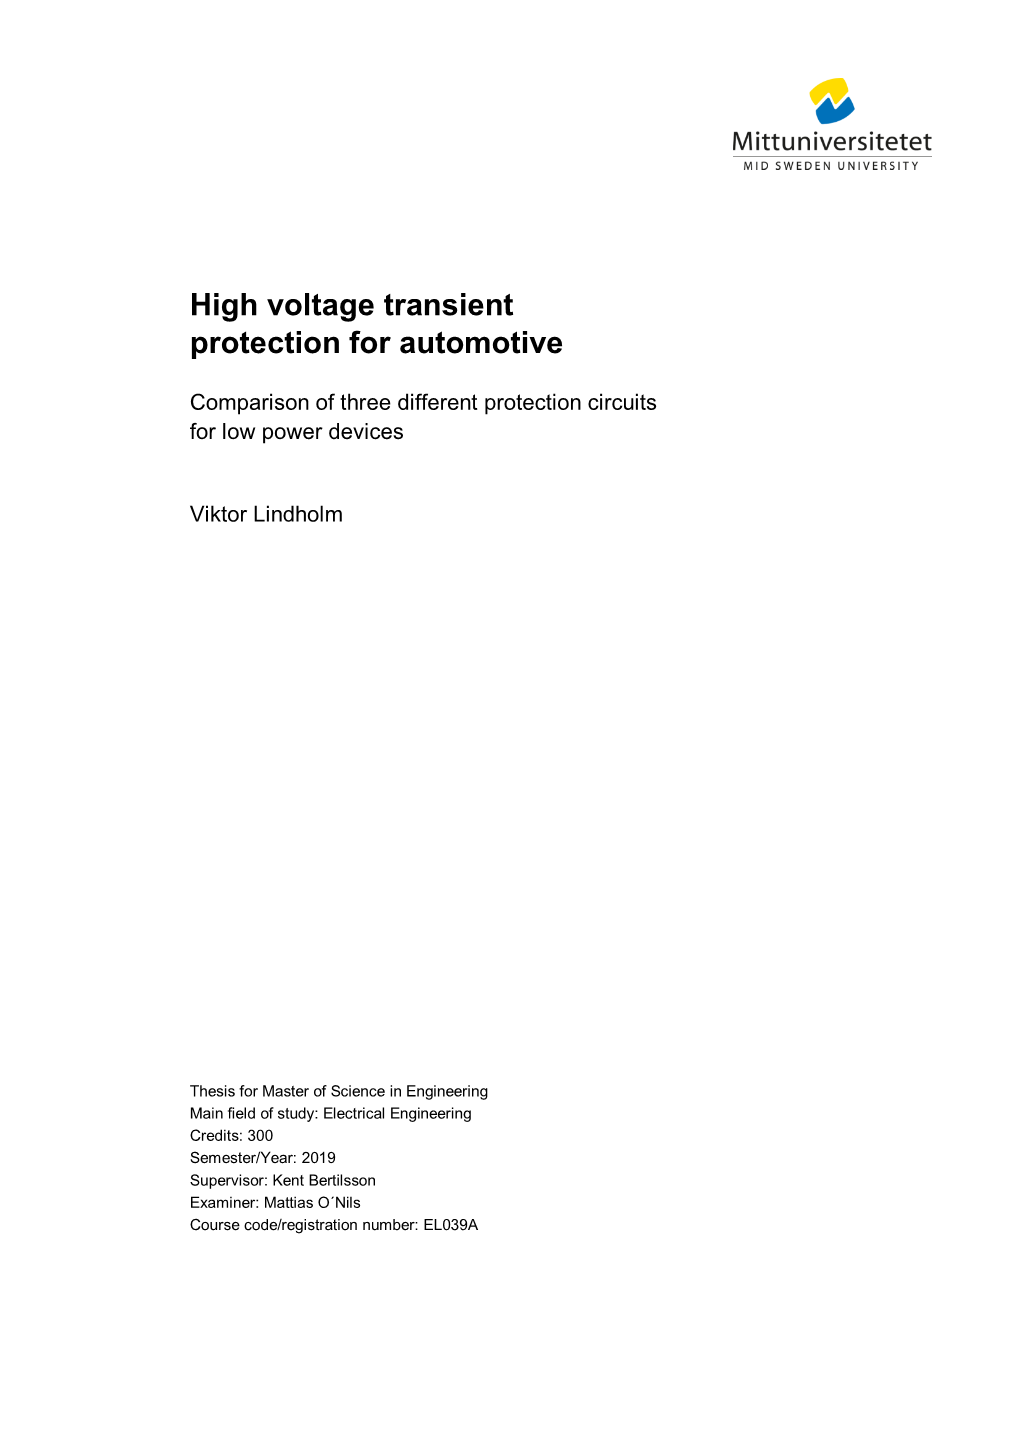 High Voltage Transient Protection for Automotive